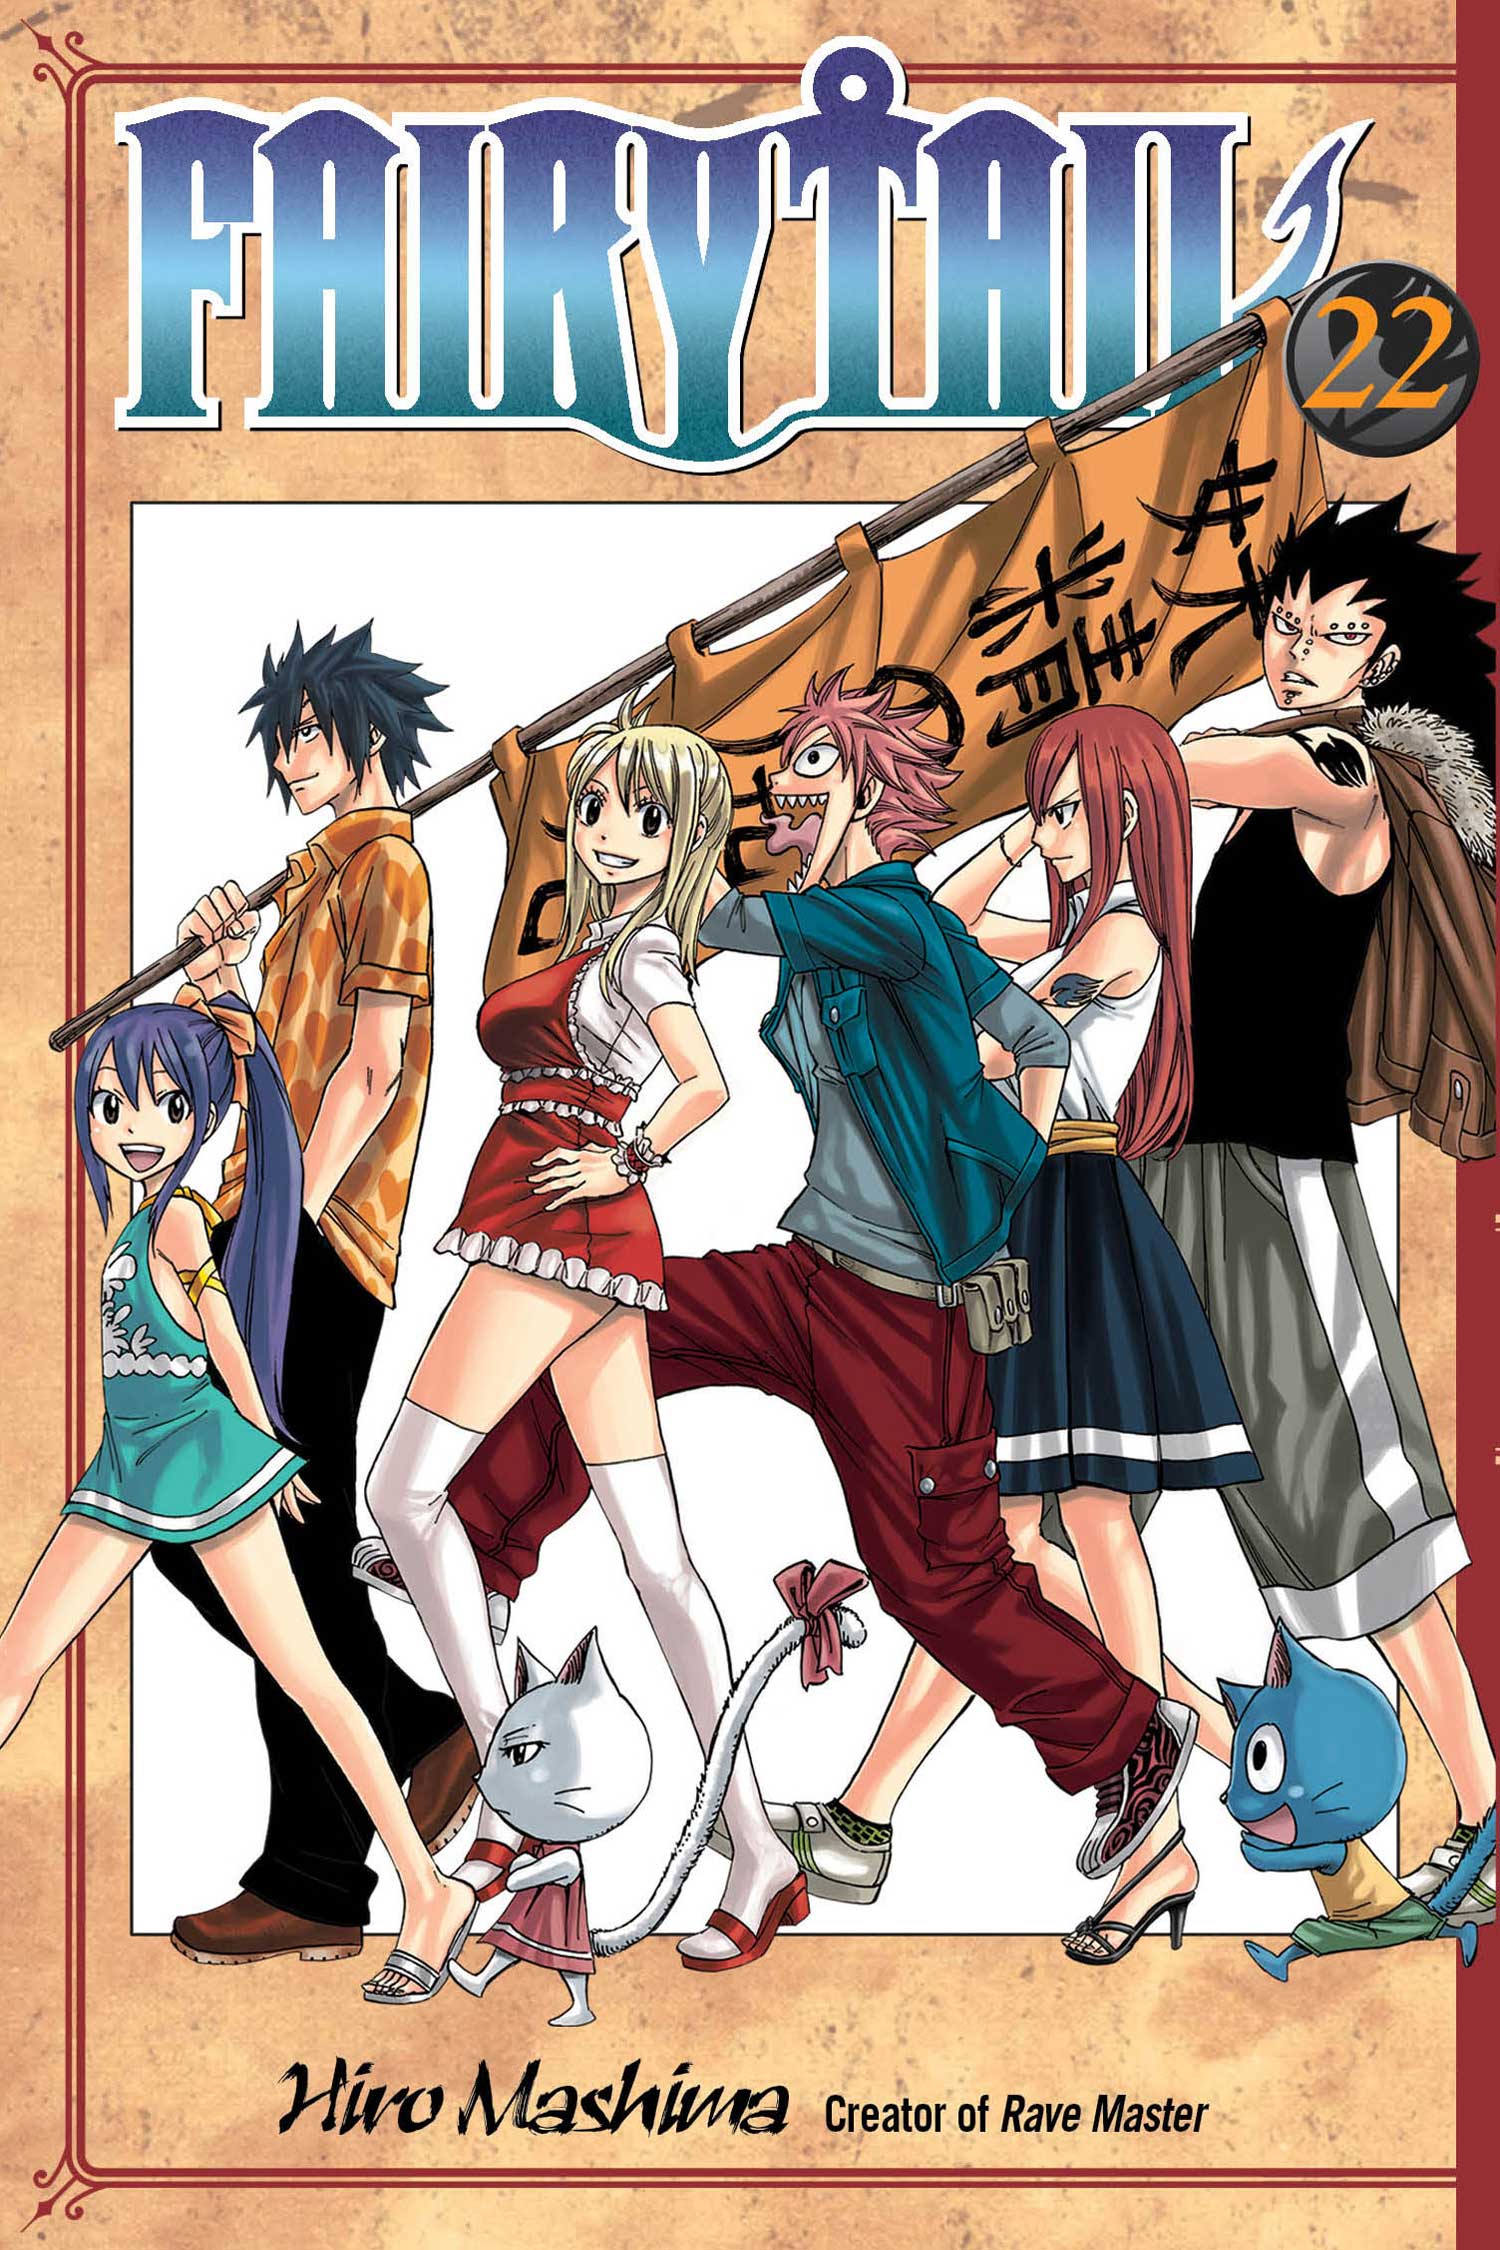 Fairy Tail RPG set to be released in North America on March 20